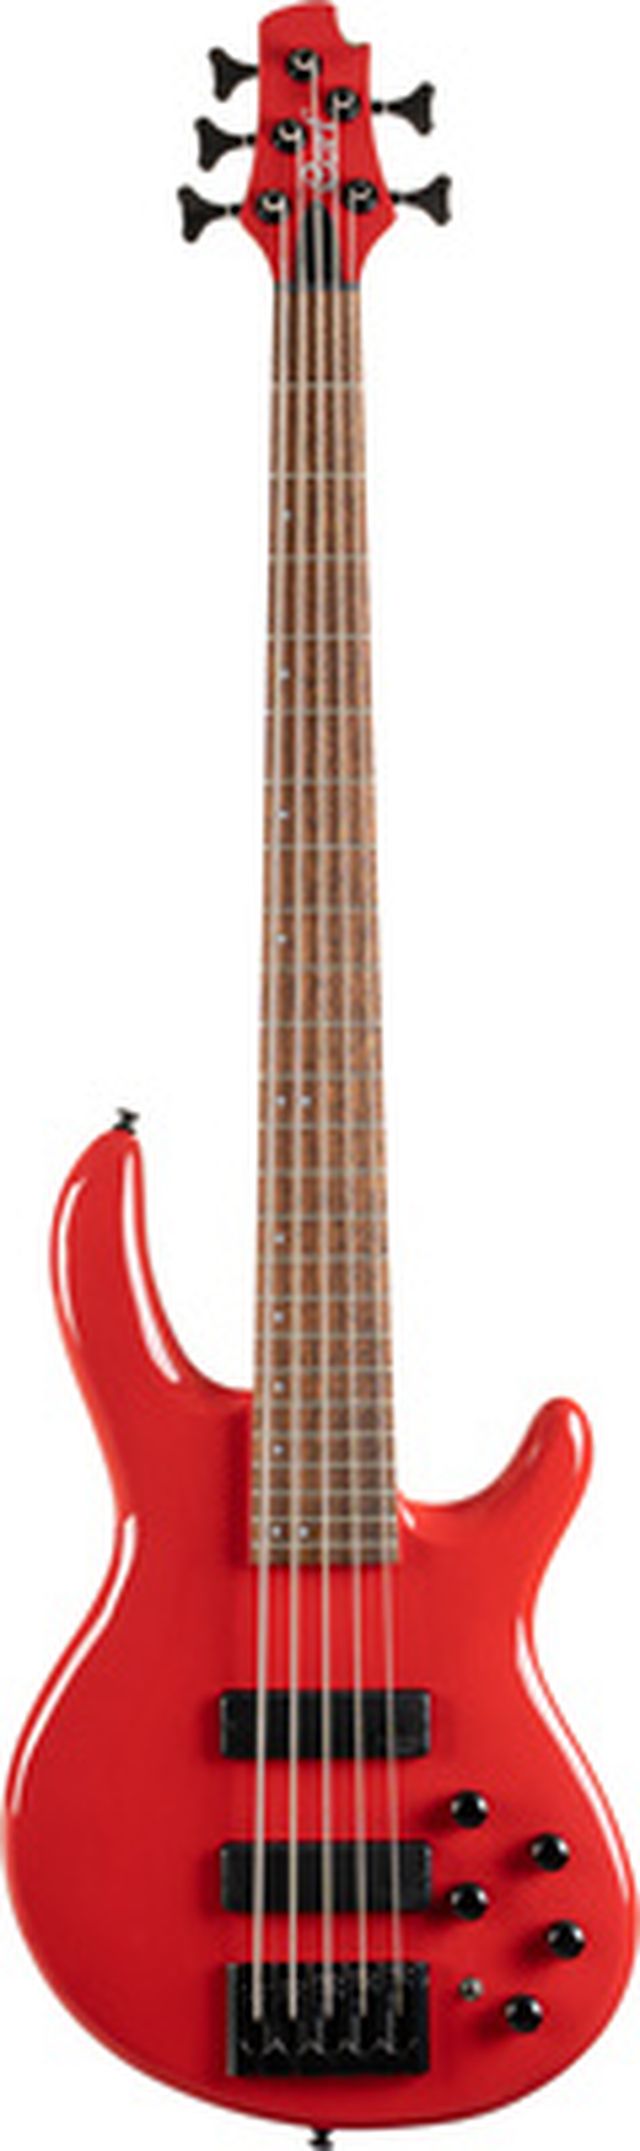 Cort C5 Deluxe Candy Red